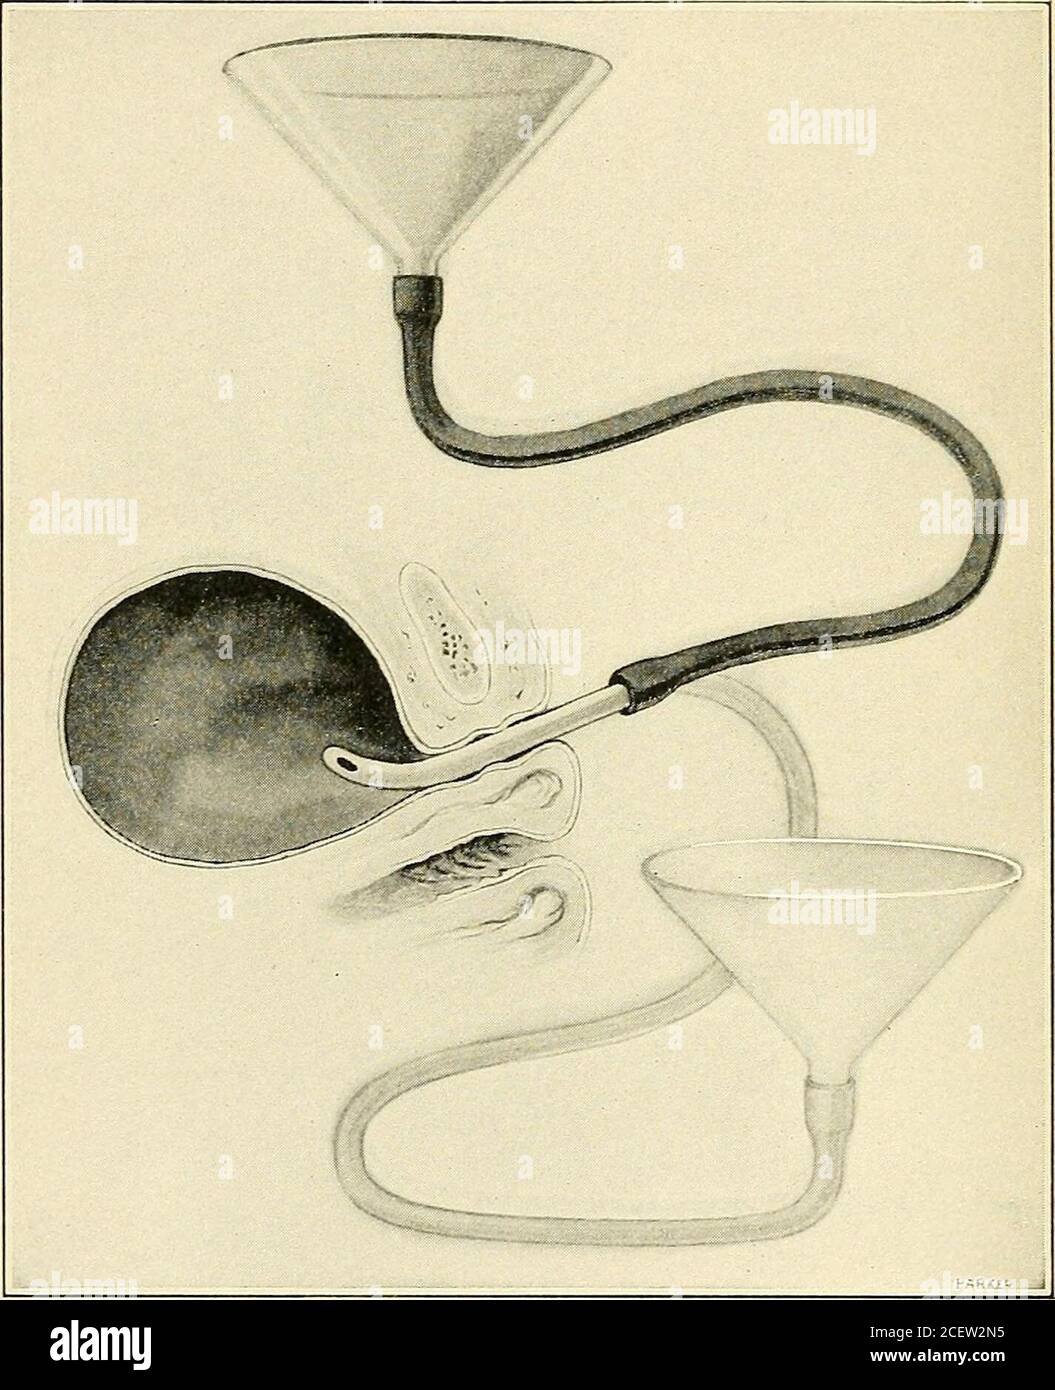 . The Principles and practice of gynecology : for students and practitioners. dtime, and follow^ed if necessary by theopium or morphine suppositories at bedtime. The bowels should be kept normally free by mild laxatives.Drastic cathartics should be avoided. Uva ursi, triticum repens, thebenzoate salts, buchu, eucalyptus, and many other time-honored andclassical remedies may be useful. Urotropin appears to be the mostvaluable single internal remedy. It maybe given in amounts varyingfrom 15 to 30 grains daily. The writer occasionally has been gratified 328 INFECTIONS, INFLAMMATIONS, AND ALLIED D Stock Photo